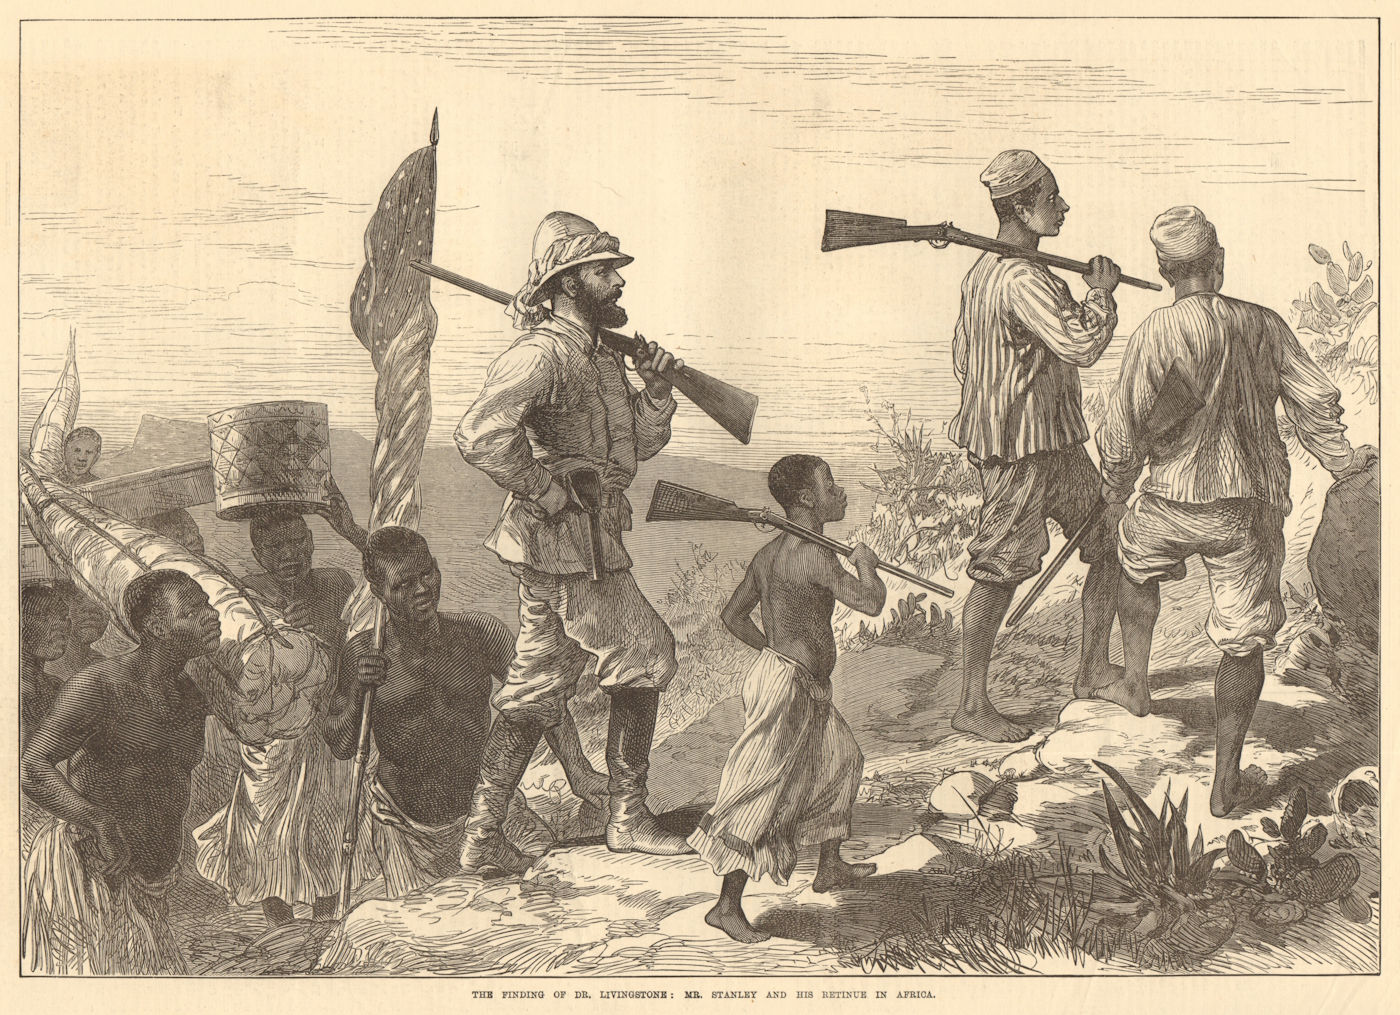 Finding Dr. Livingstone: Mr Stanley & his retinue. Africa Explorers 1872 print